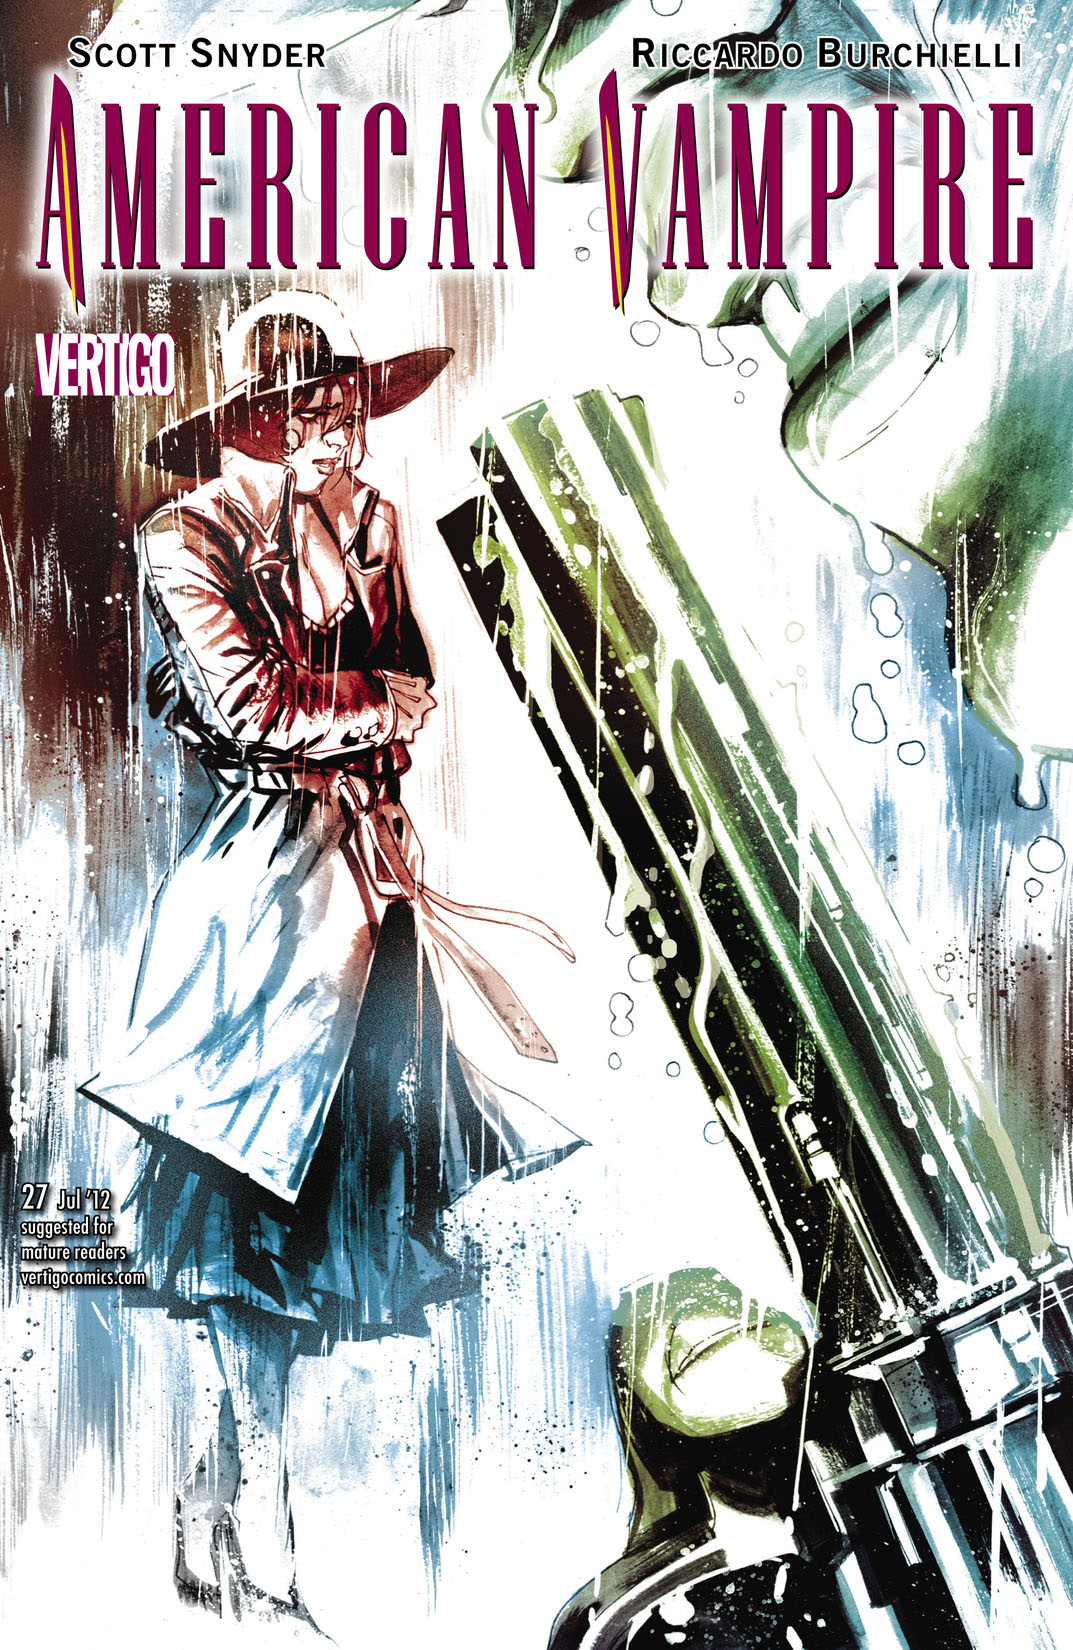 American Vampire #27 preview images